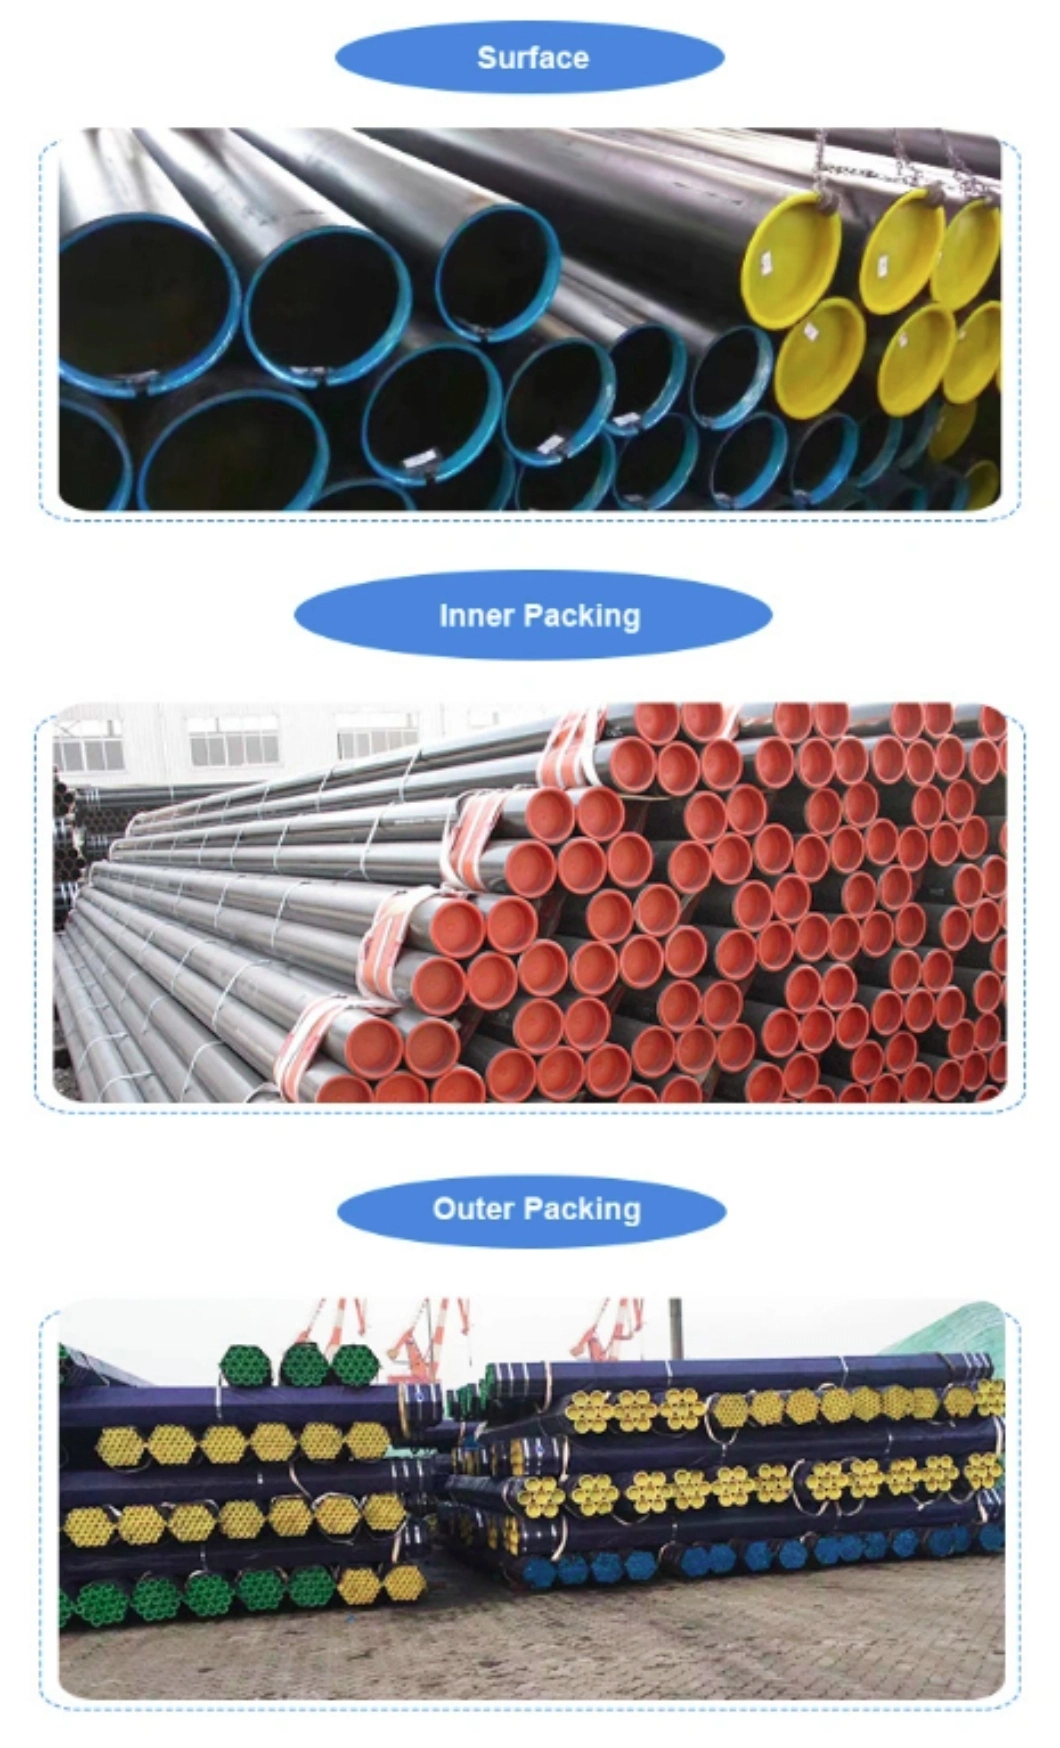 API Oil Well Water Well Drilling Hot Rolled Steel Casing Tube/Pipe Nq Hq Pq Bq Nw Hw Pw Wireline Hardened Drill Rod Casing Pipe Oil Well and Gas Drill Pipe